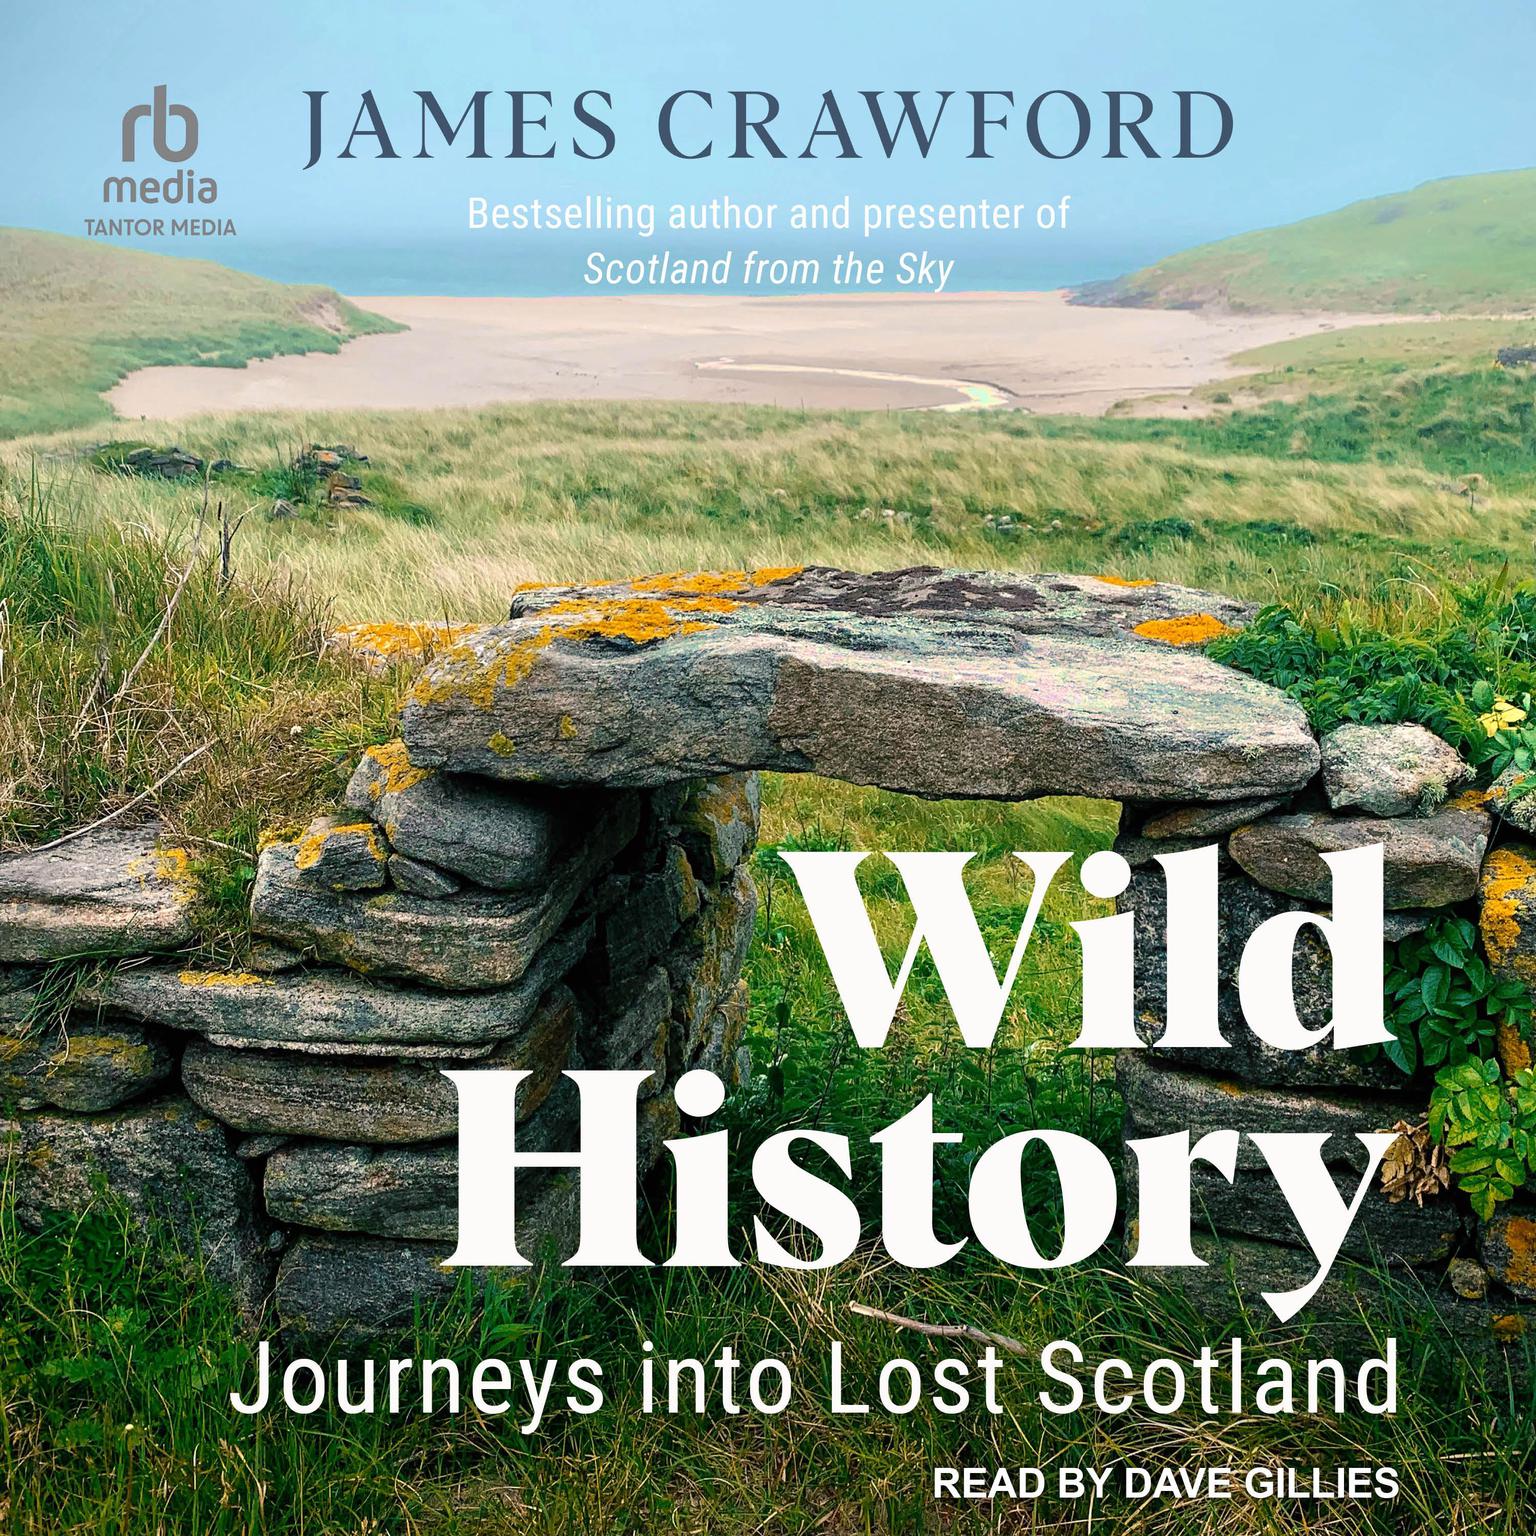 Wild History: Journeys into Lost Scotland Audiobook, by James Crawford